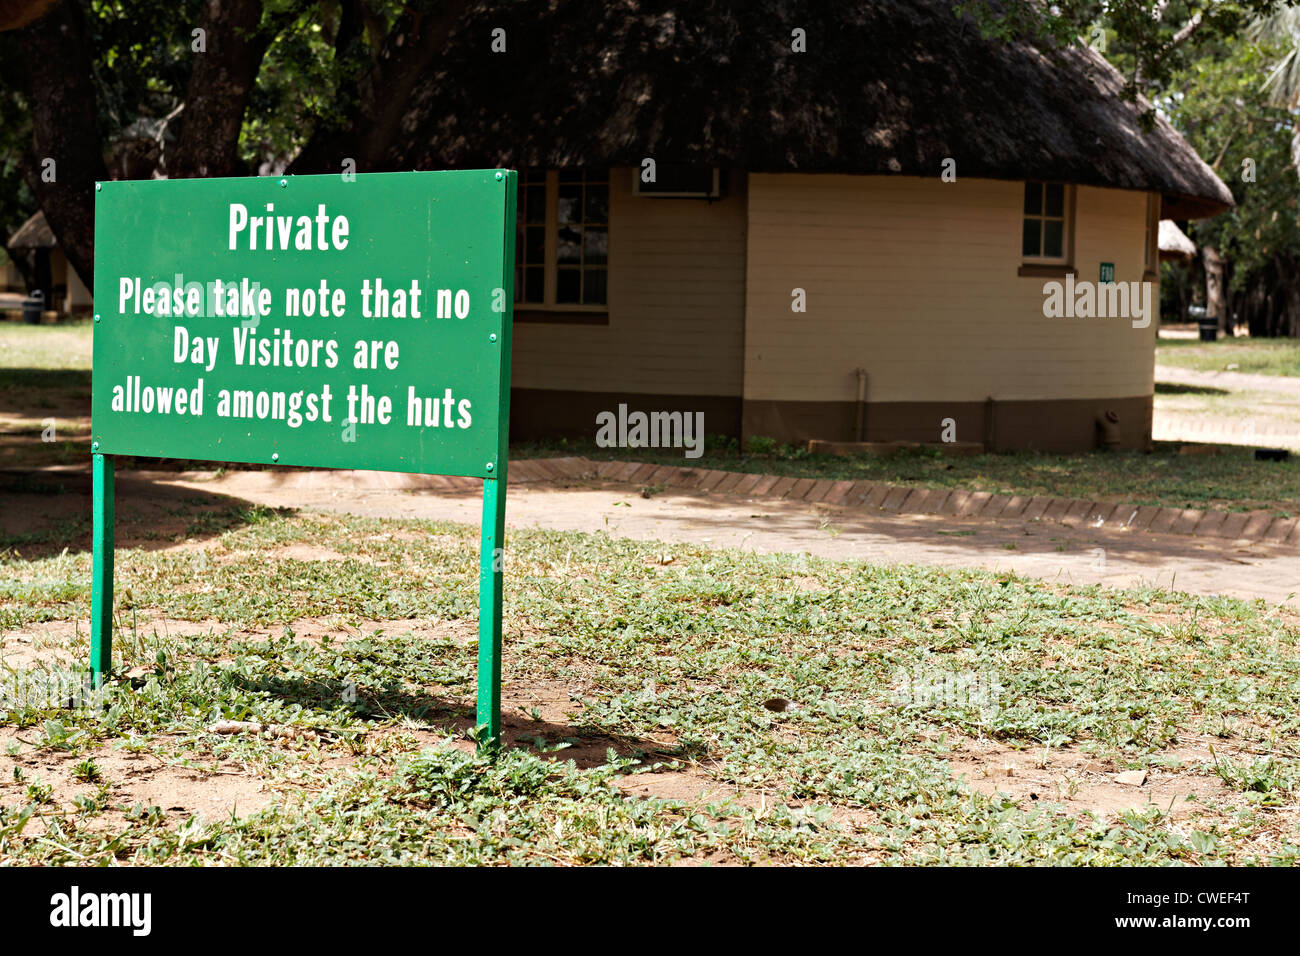 No day visitors allowed sign in the Letaba Camp, Kruger National Park, South Africa Stock Photo